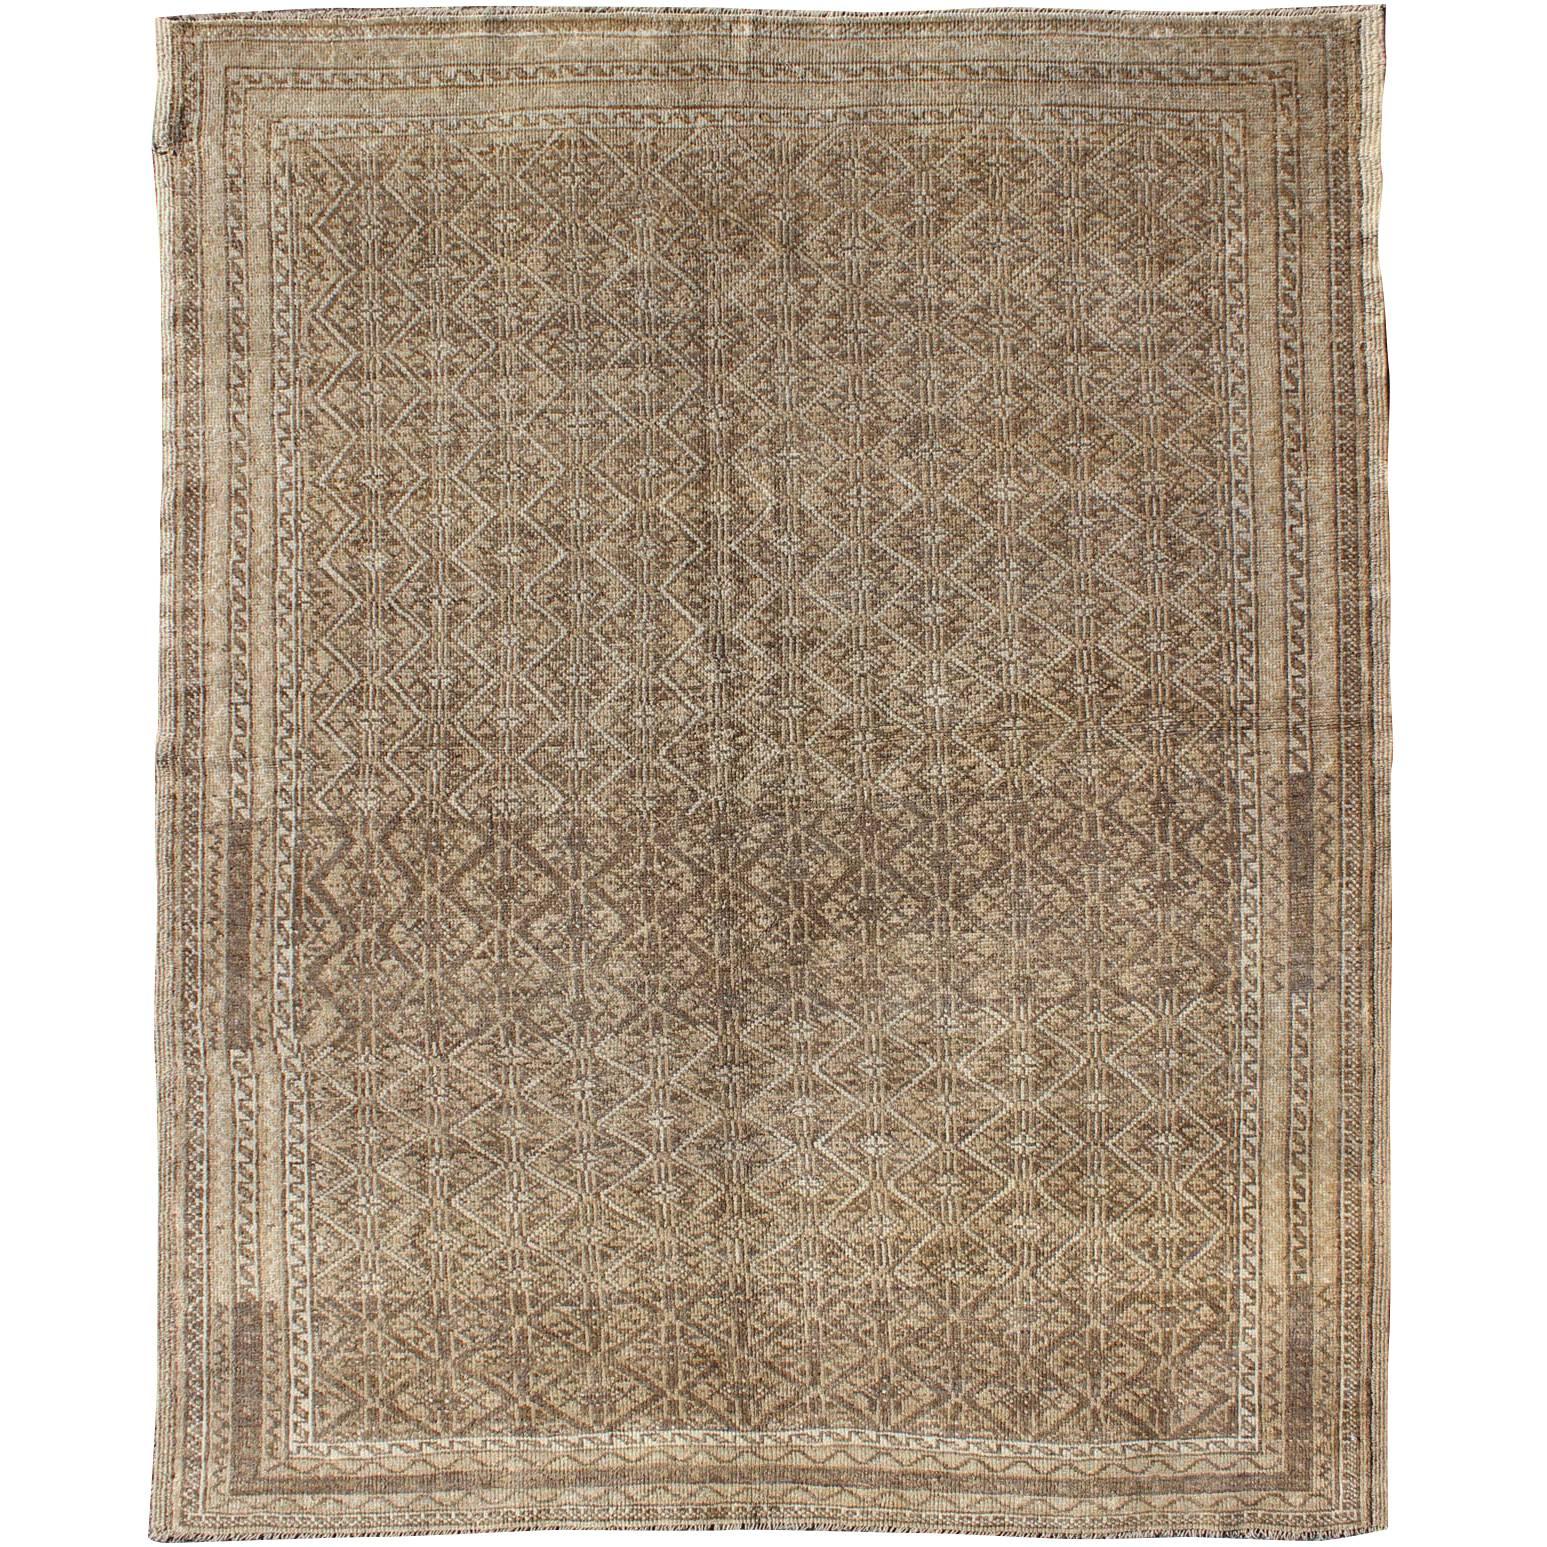 Unique Turkish Rug with Brown and Neutral Colors